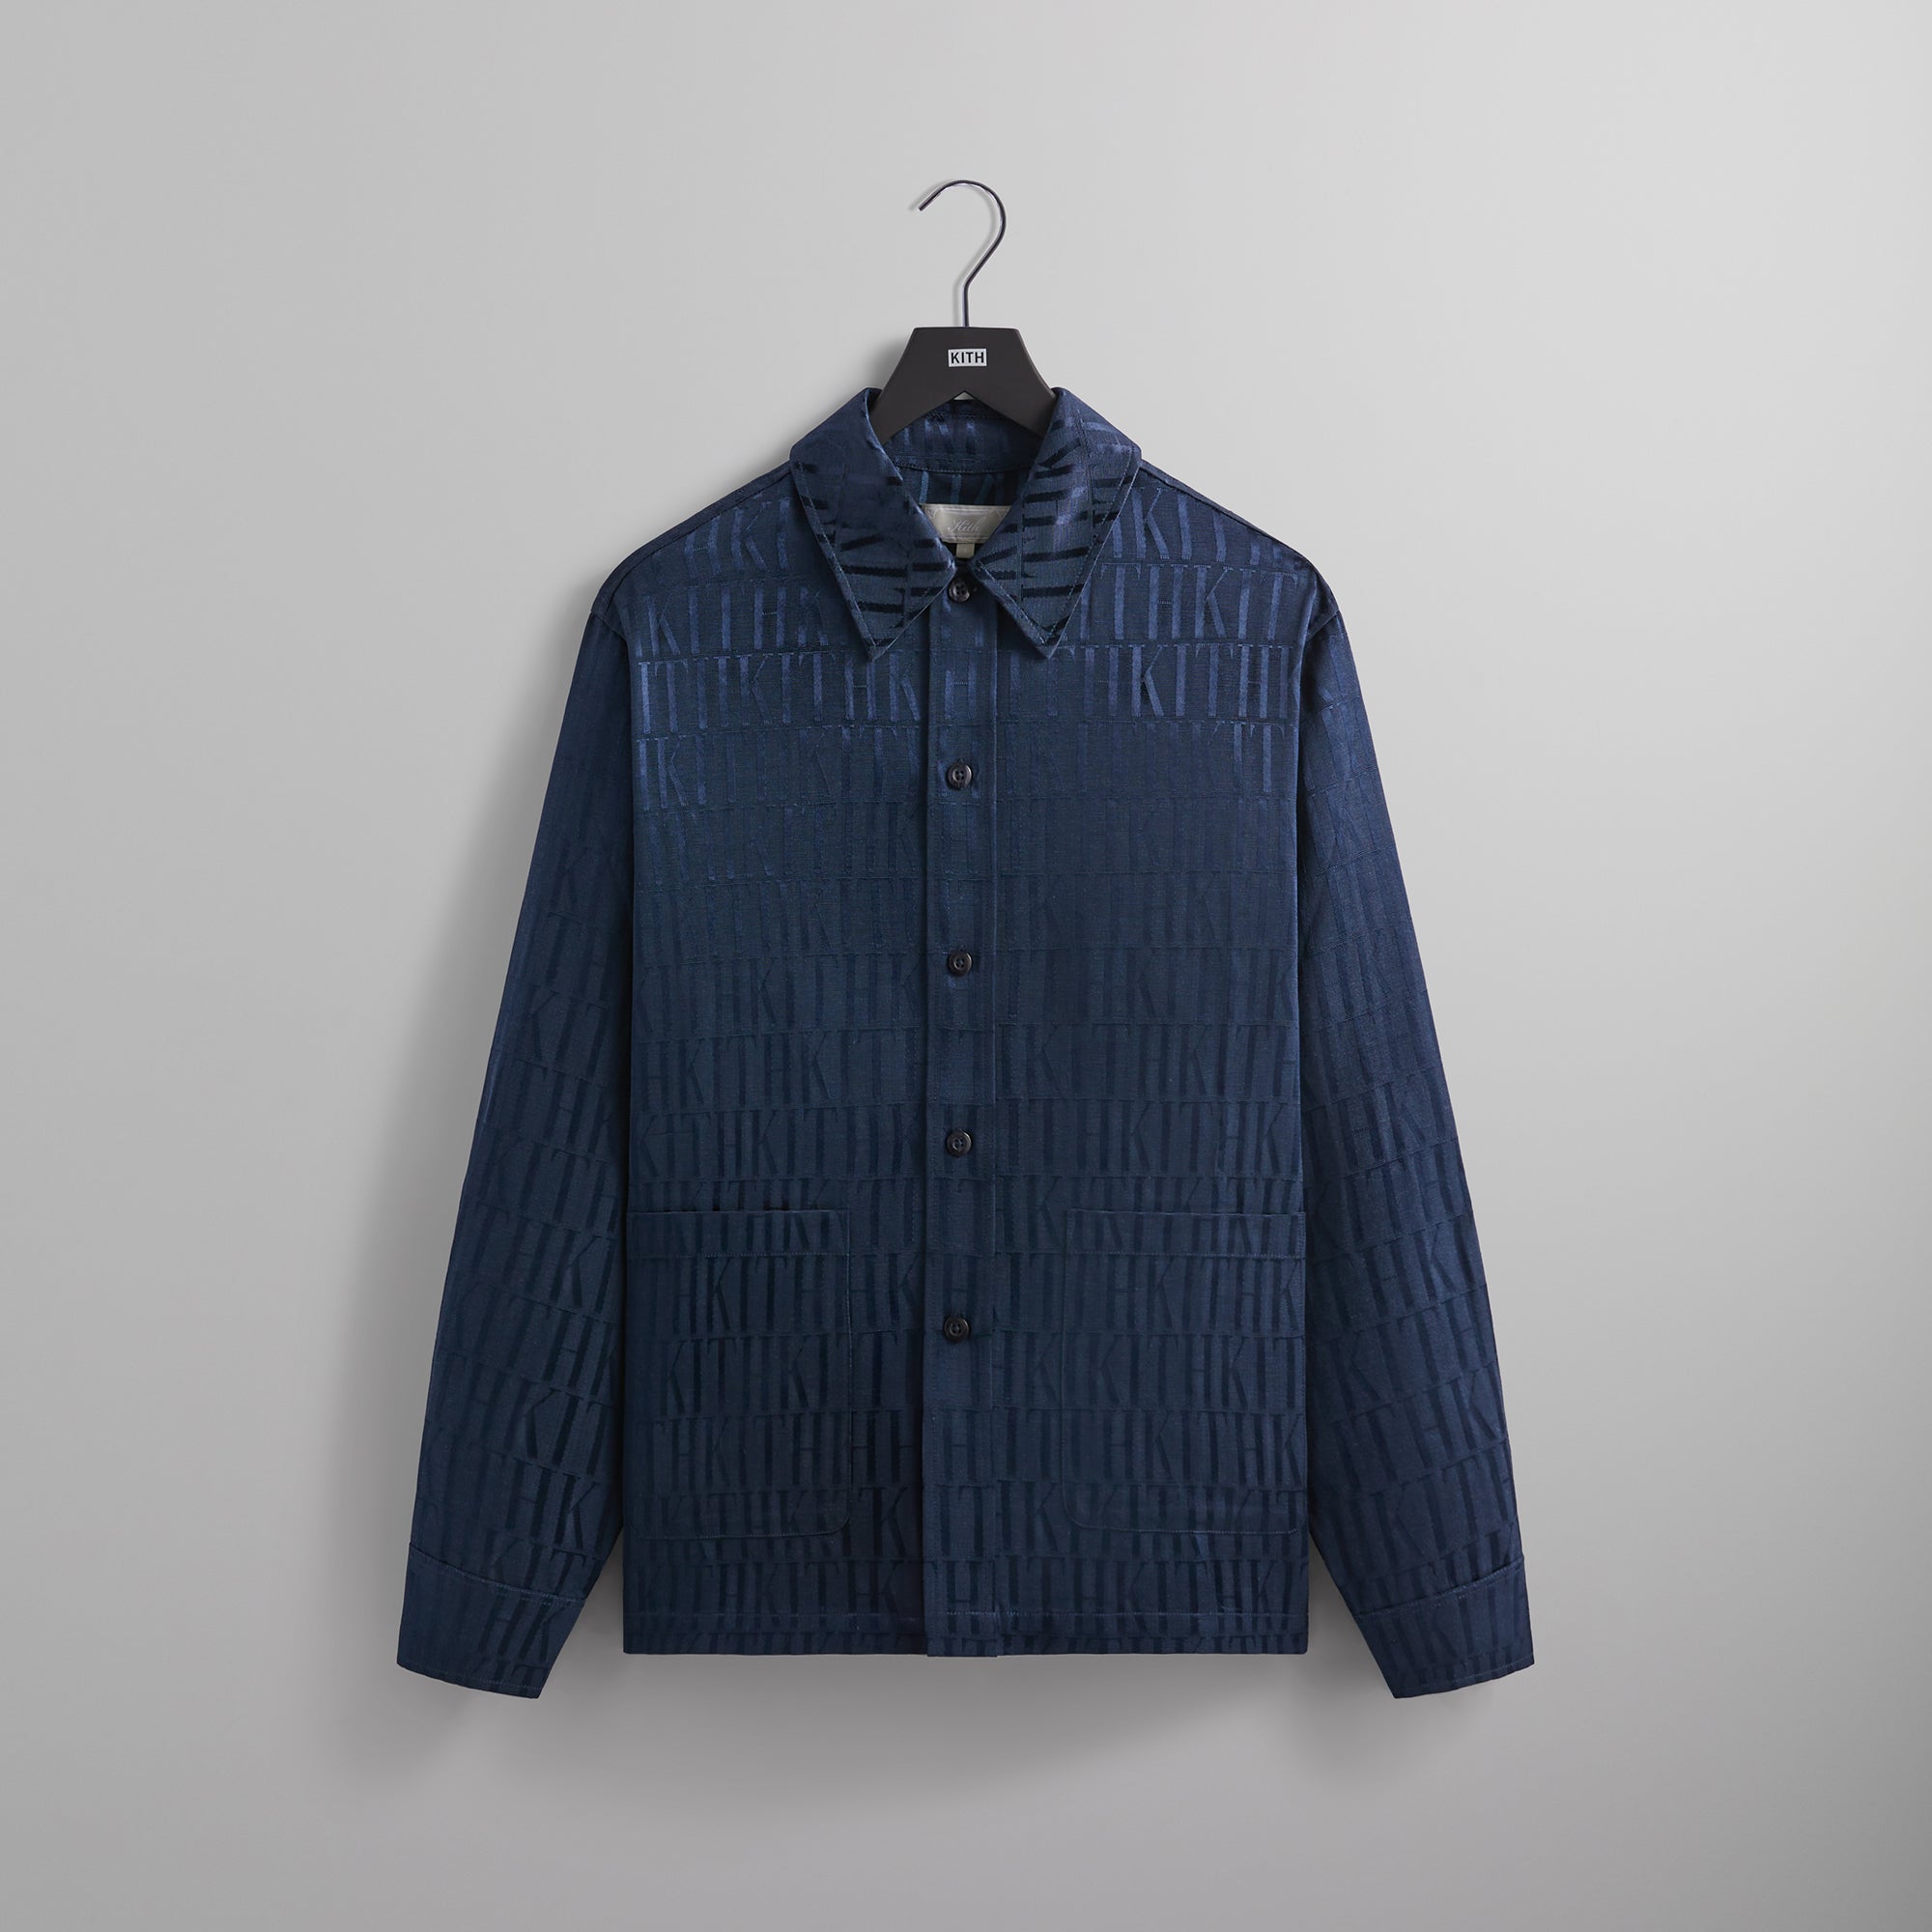 Kith Jacquard Faille Long Sleeve Boxy Collared Overshirt - Nocturnal